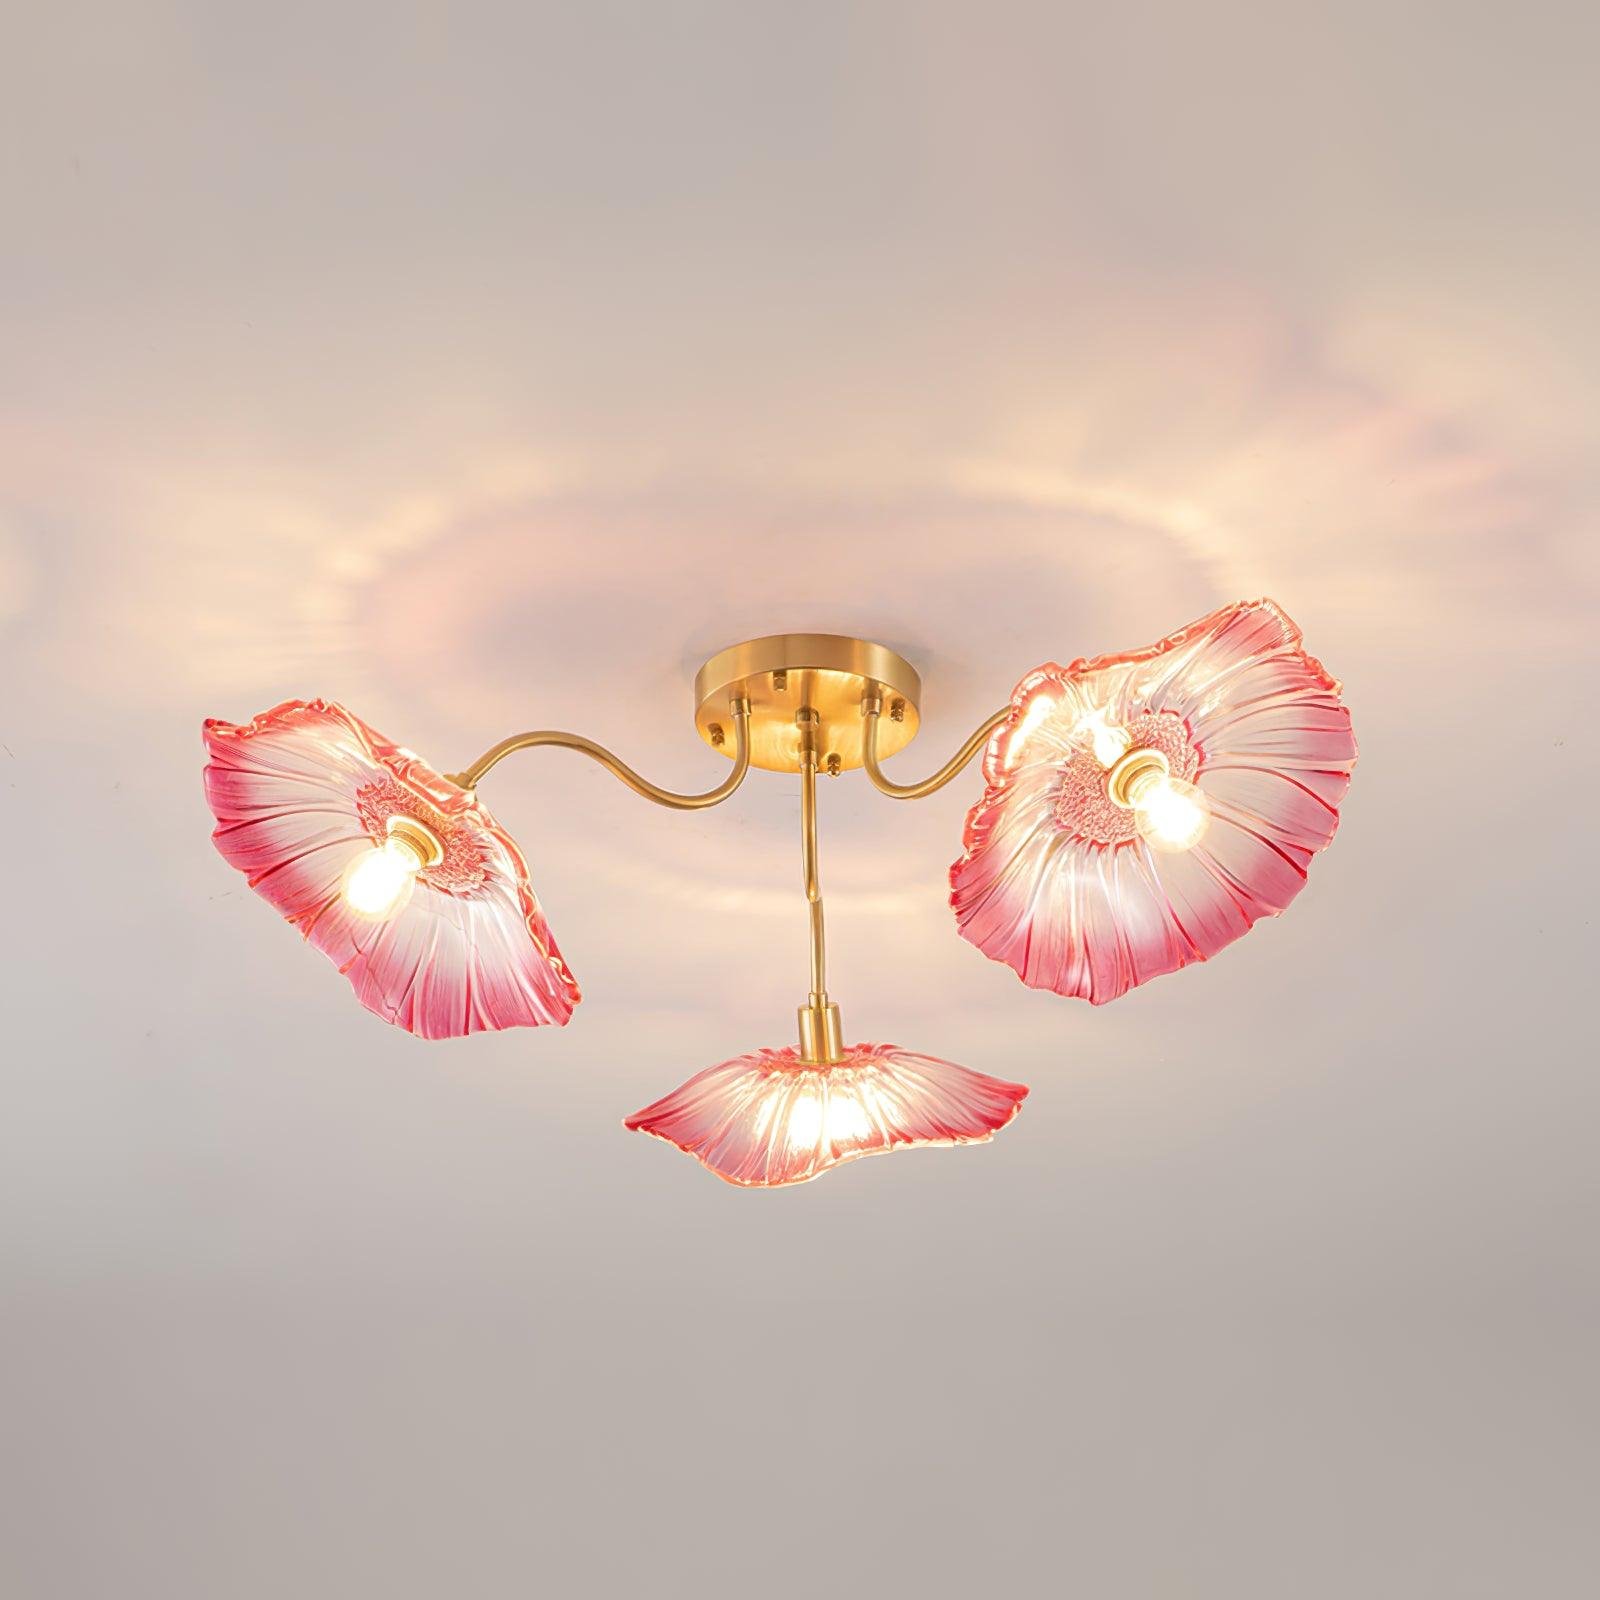 Lotus Leaf Glass Ceiling Lamp: Gold and Pink Design, 3 Heads, 31.5-inch Diameter, 10.3-inch Height (80cm x 26cm)